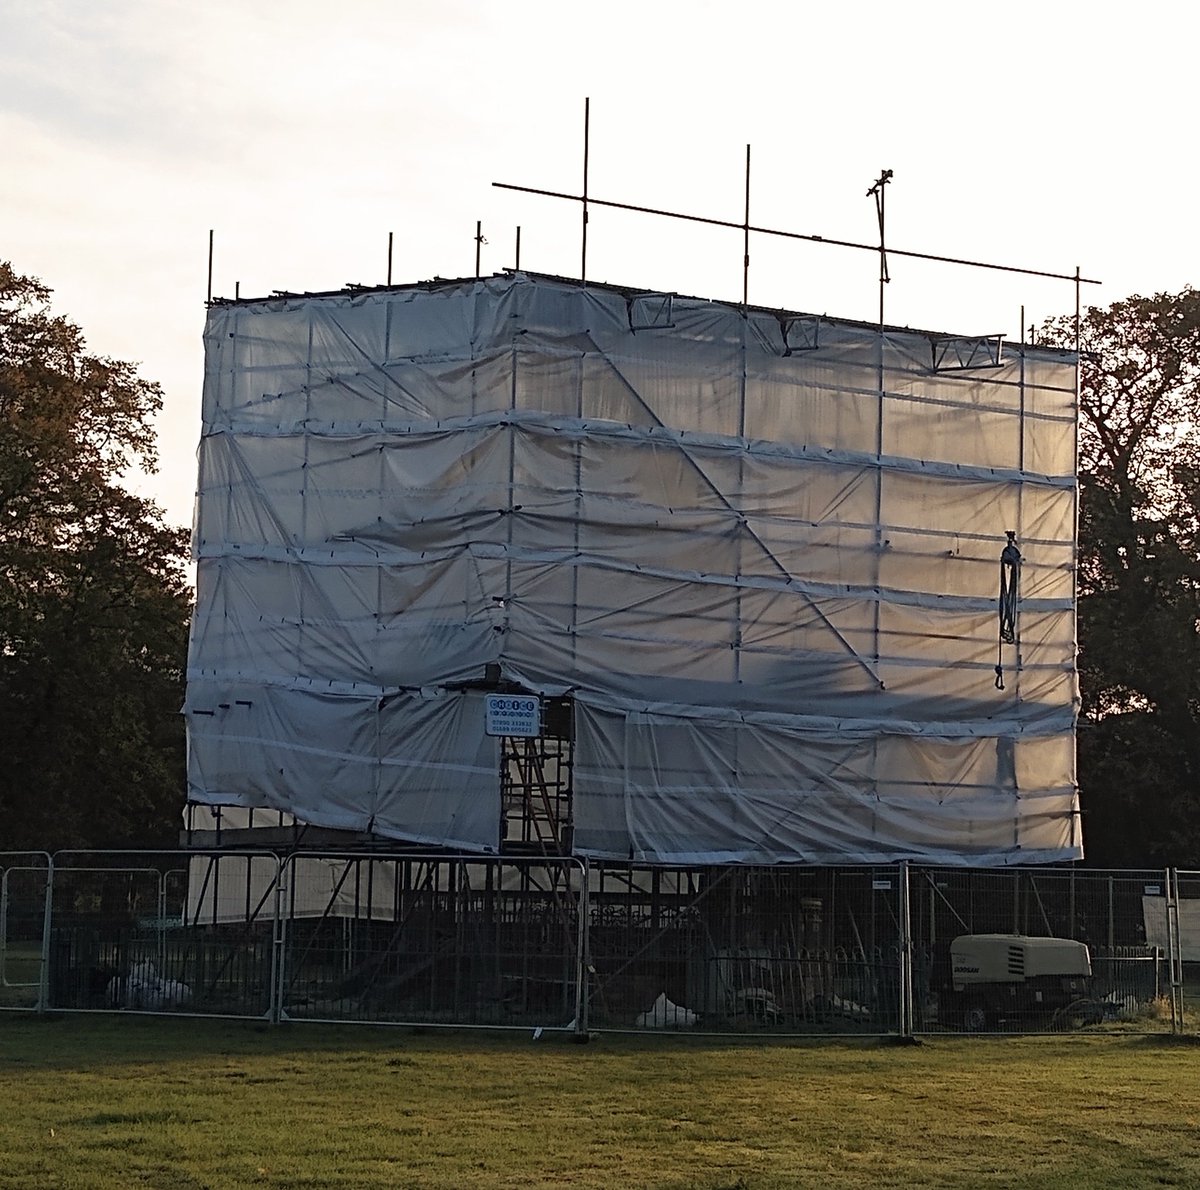 A current picture of the #bowie #bandstand in Beckenham Rec as it undergoes a complete renervation #DavidBowie #beckenham #bromley #landmark #southlondon